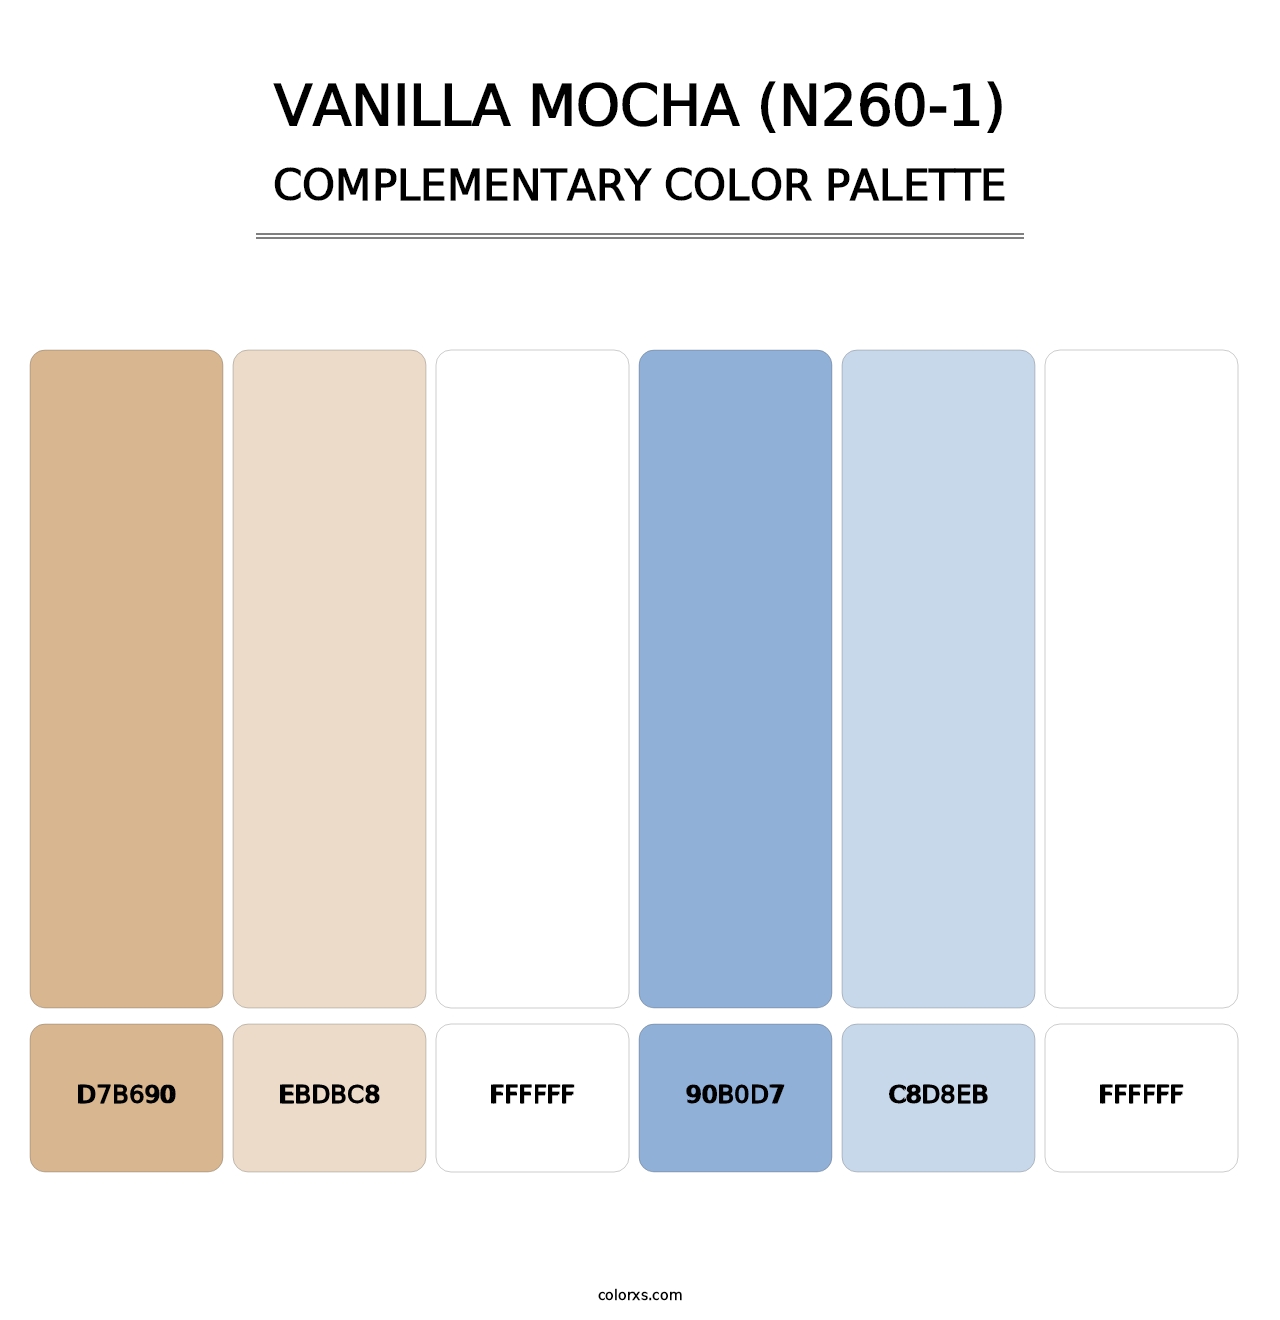 Vanilla Mocha (N260-1) - Complementary Color Palette